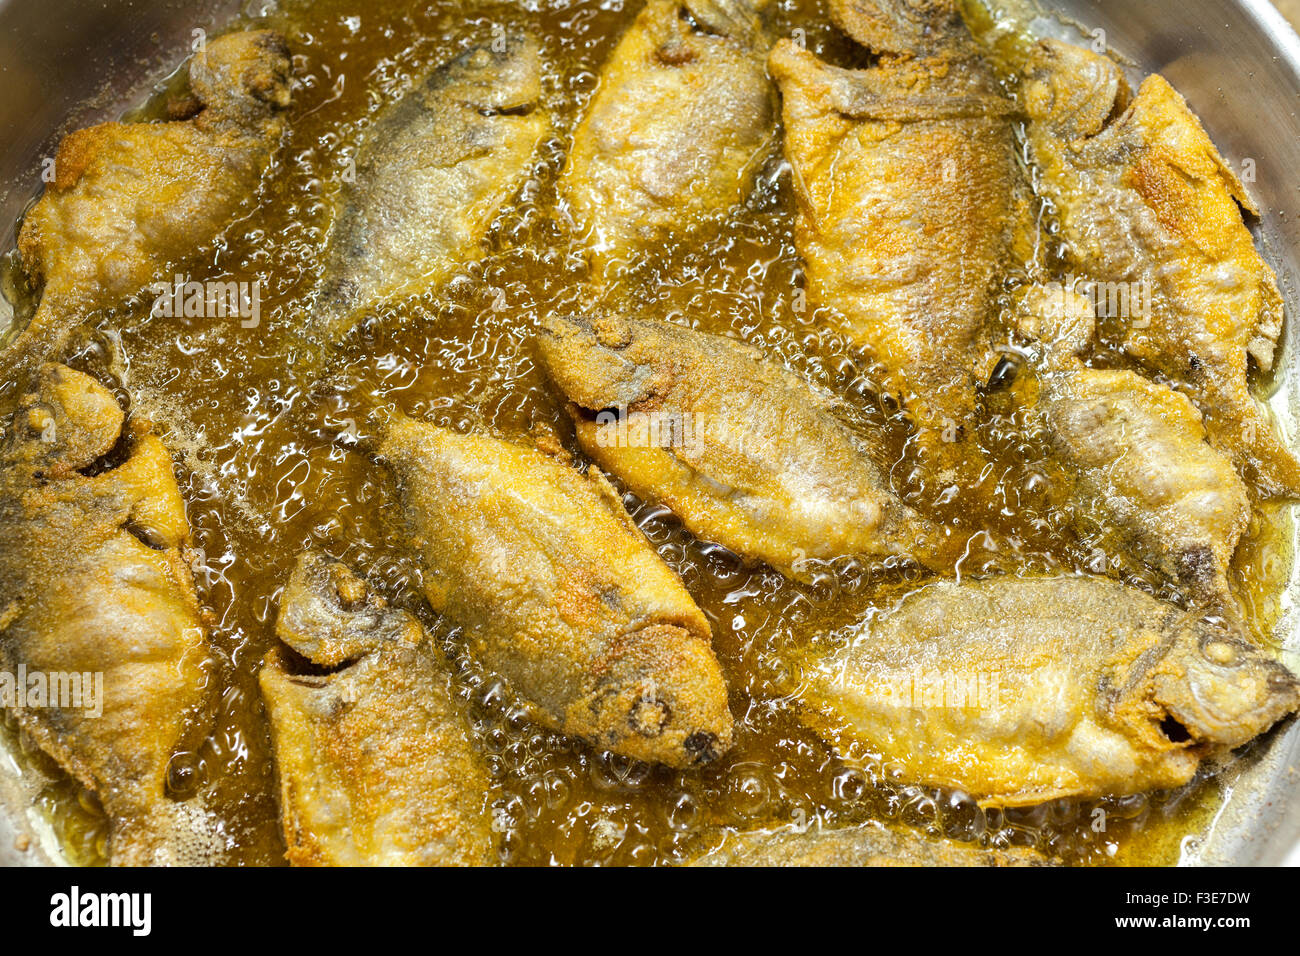 Small fishes of the Greek sea roasted in the frying pan Stock Photo